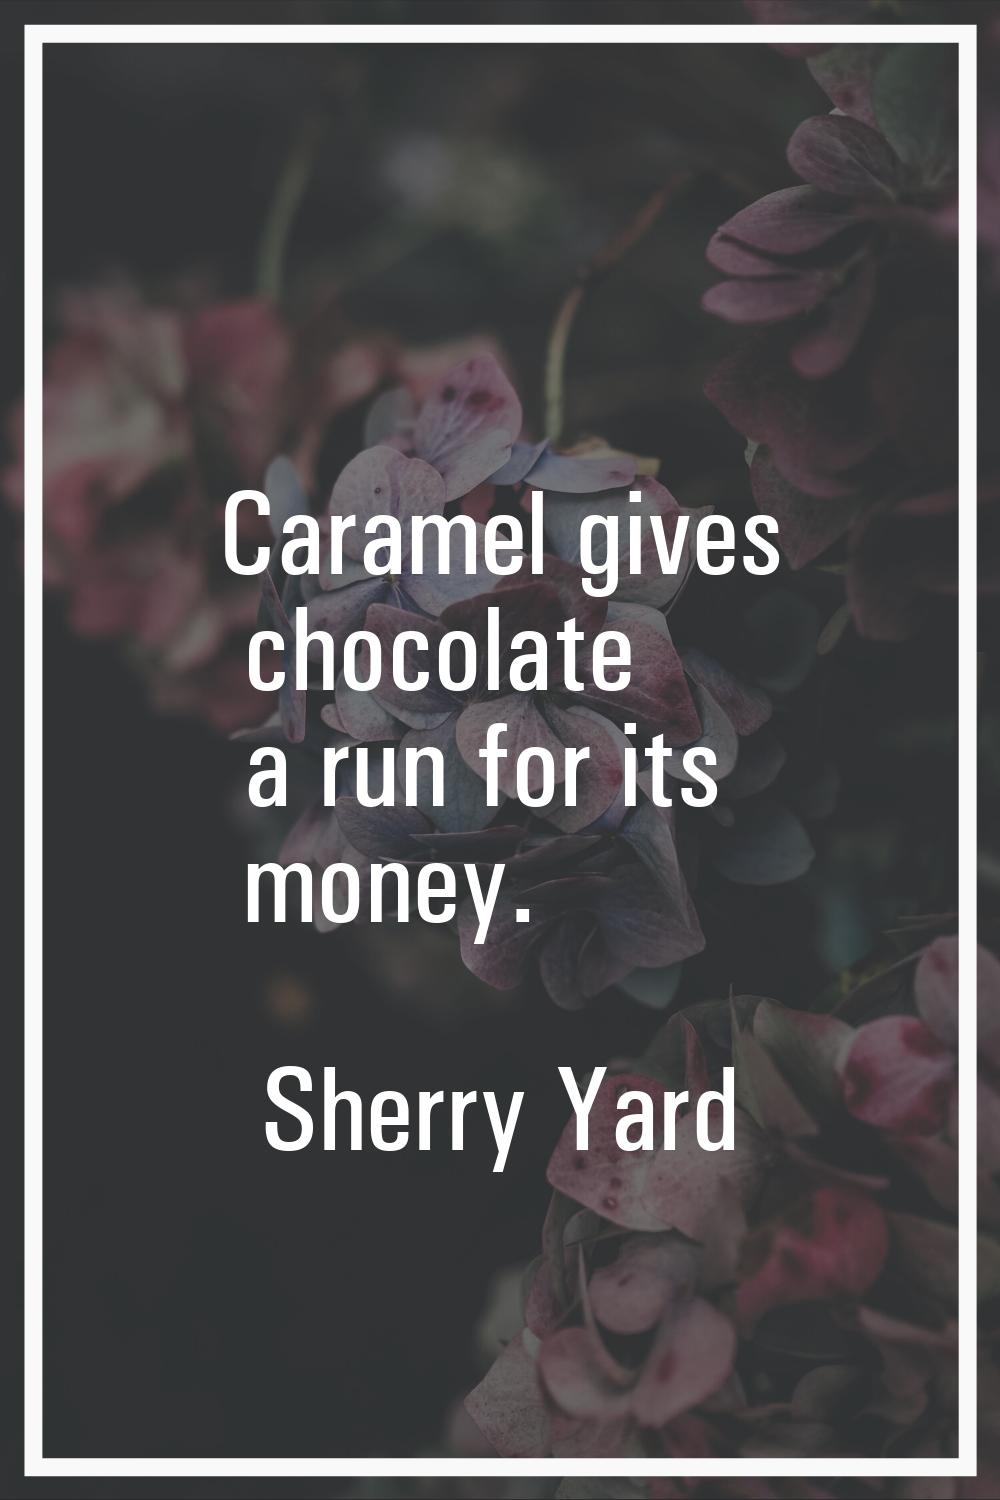 Caramel gives chocolate a run for its money.